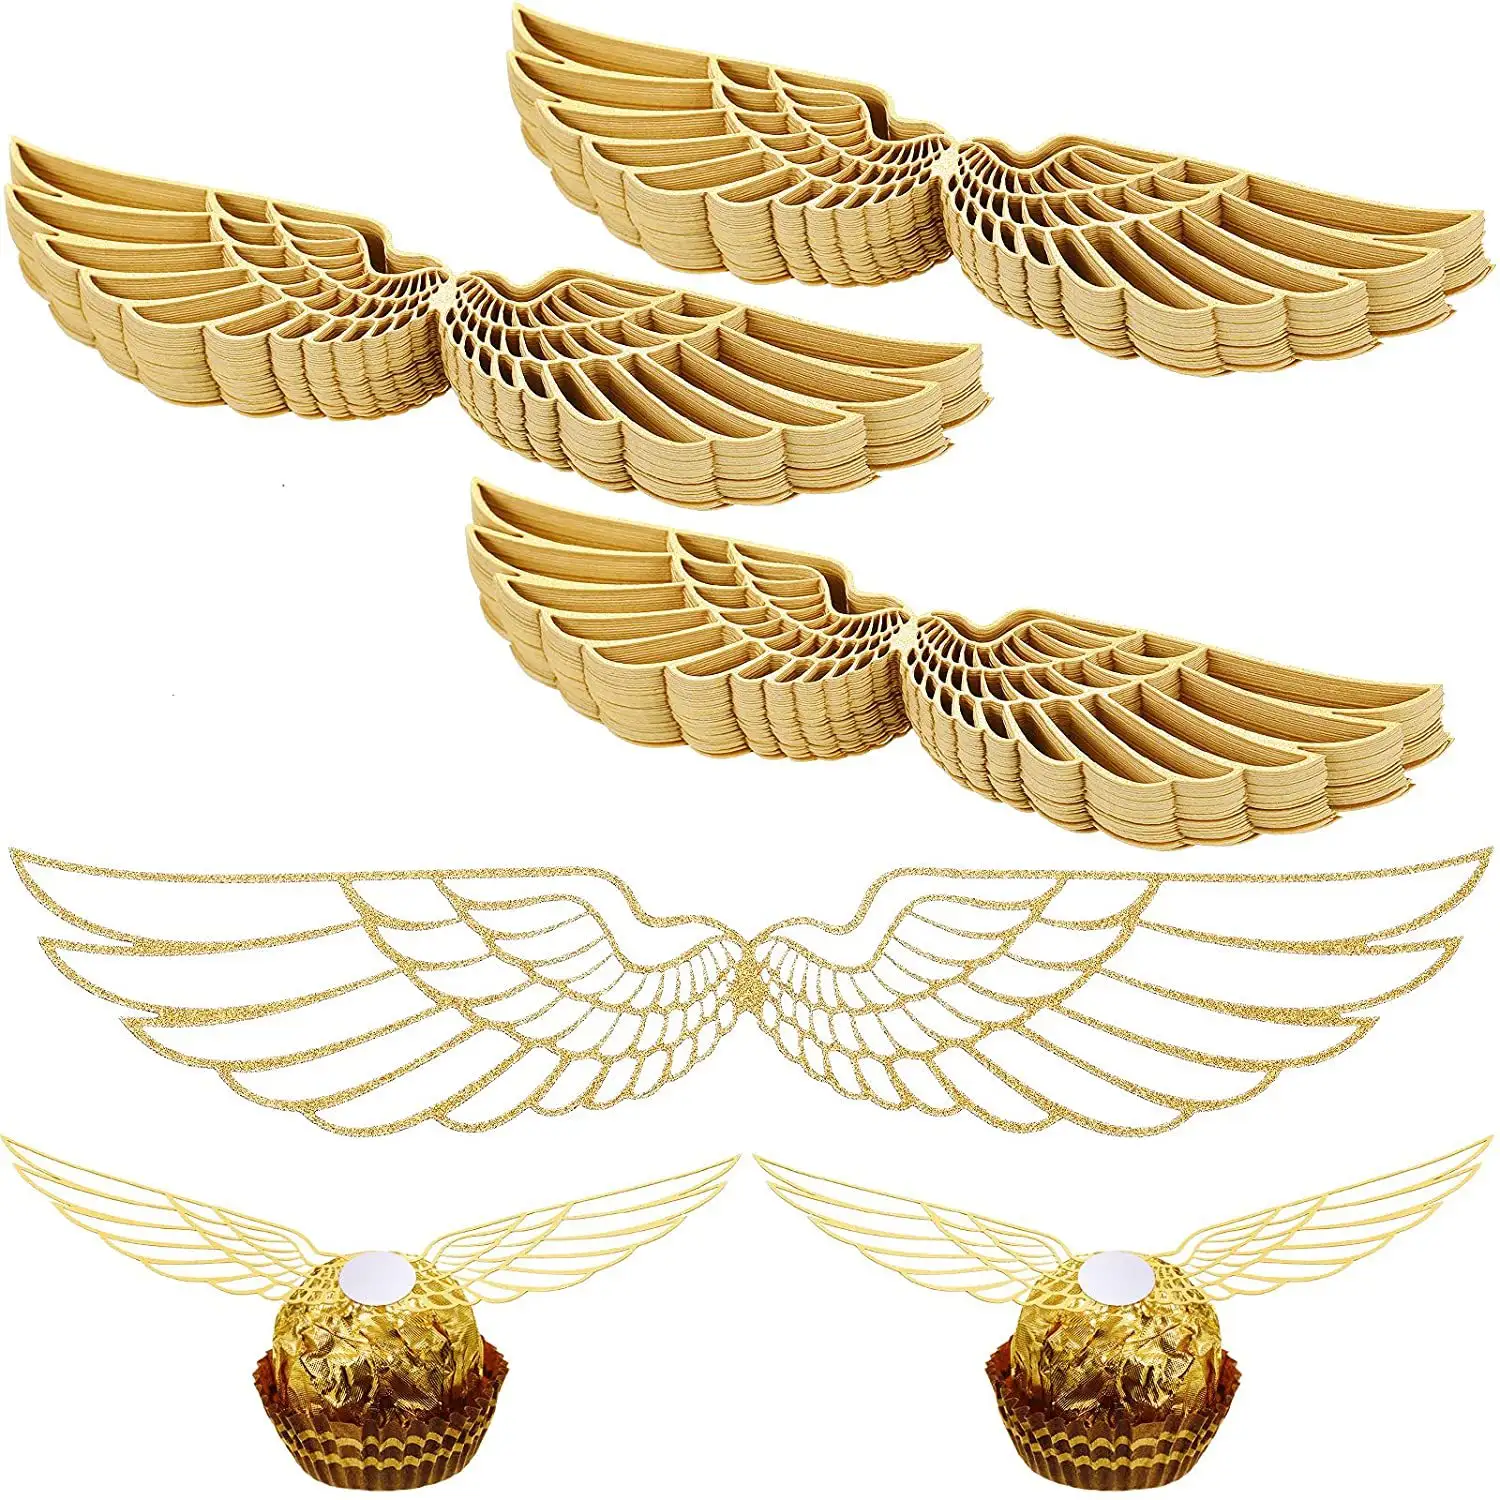 50 Pieces New Hollow Chocolate Cake with 3D Golden Wings Decoration Golden Snitch for Party Decoration